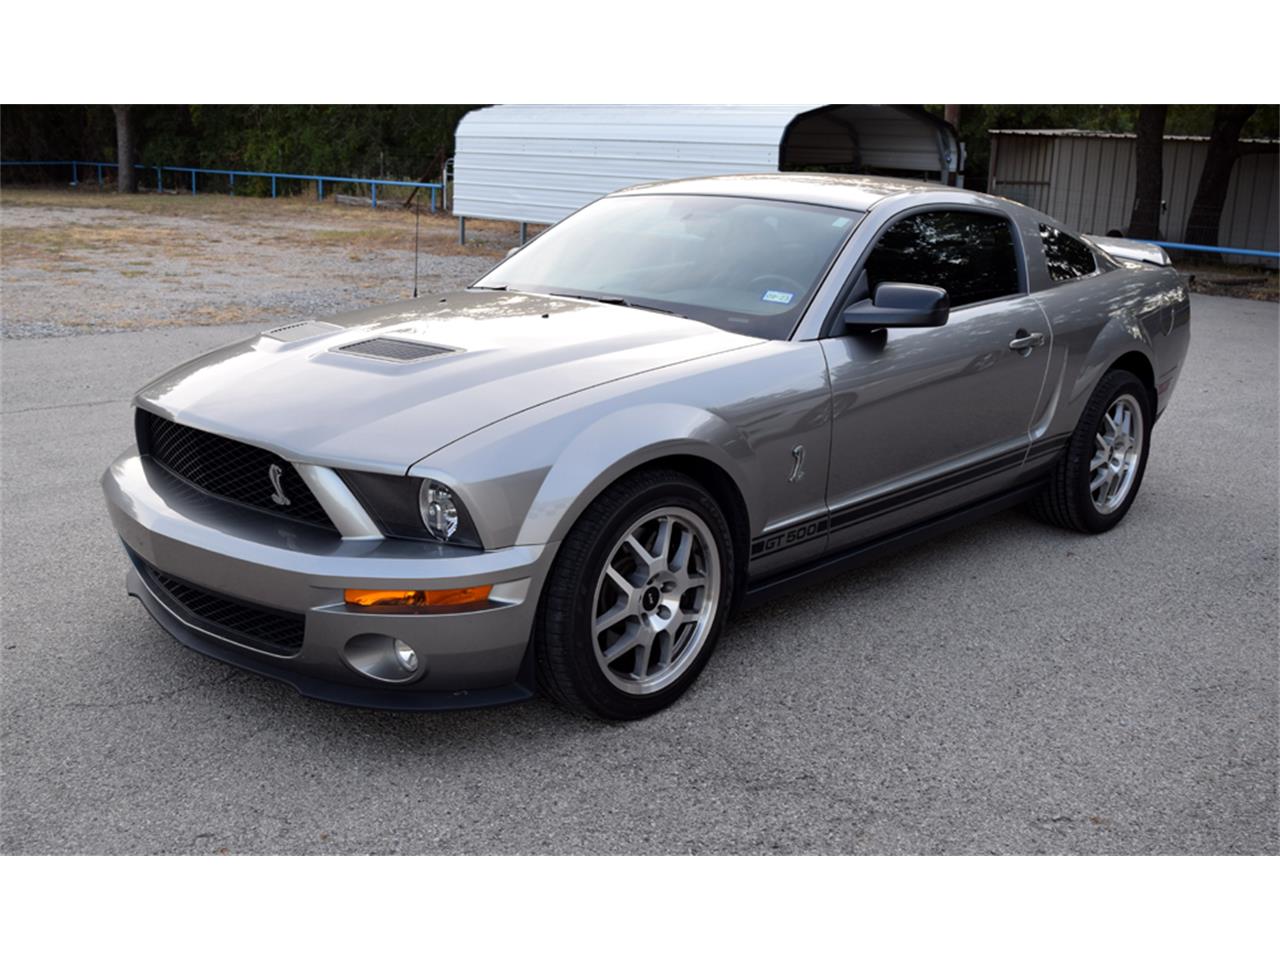 For Sale: 2008 Ford Mustang Shelby GT500 in Lipan, Texas for sale in Lipan, TX